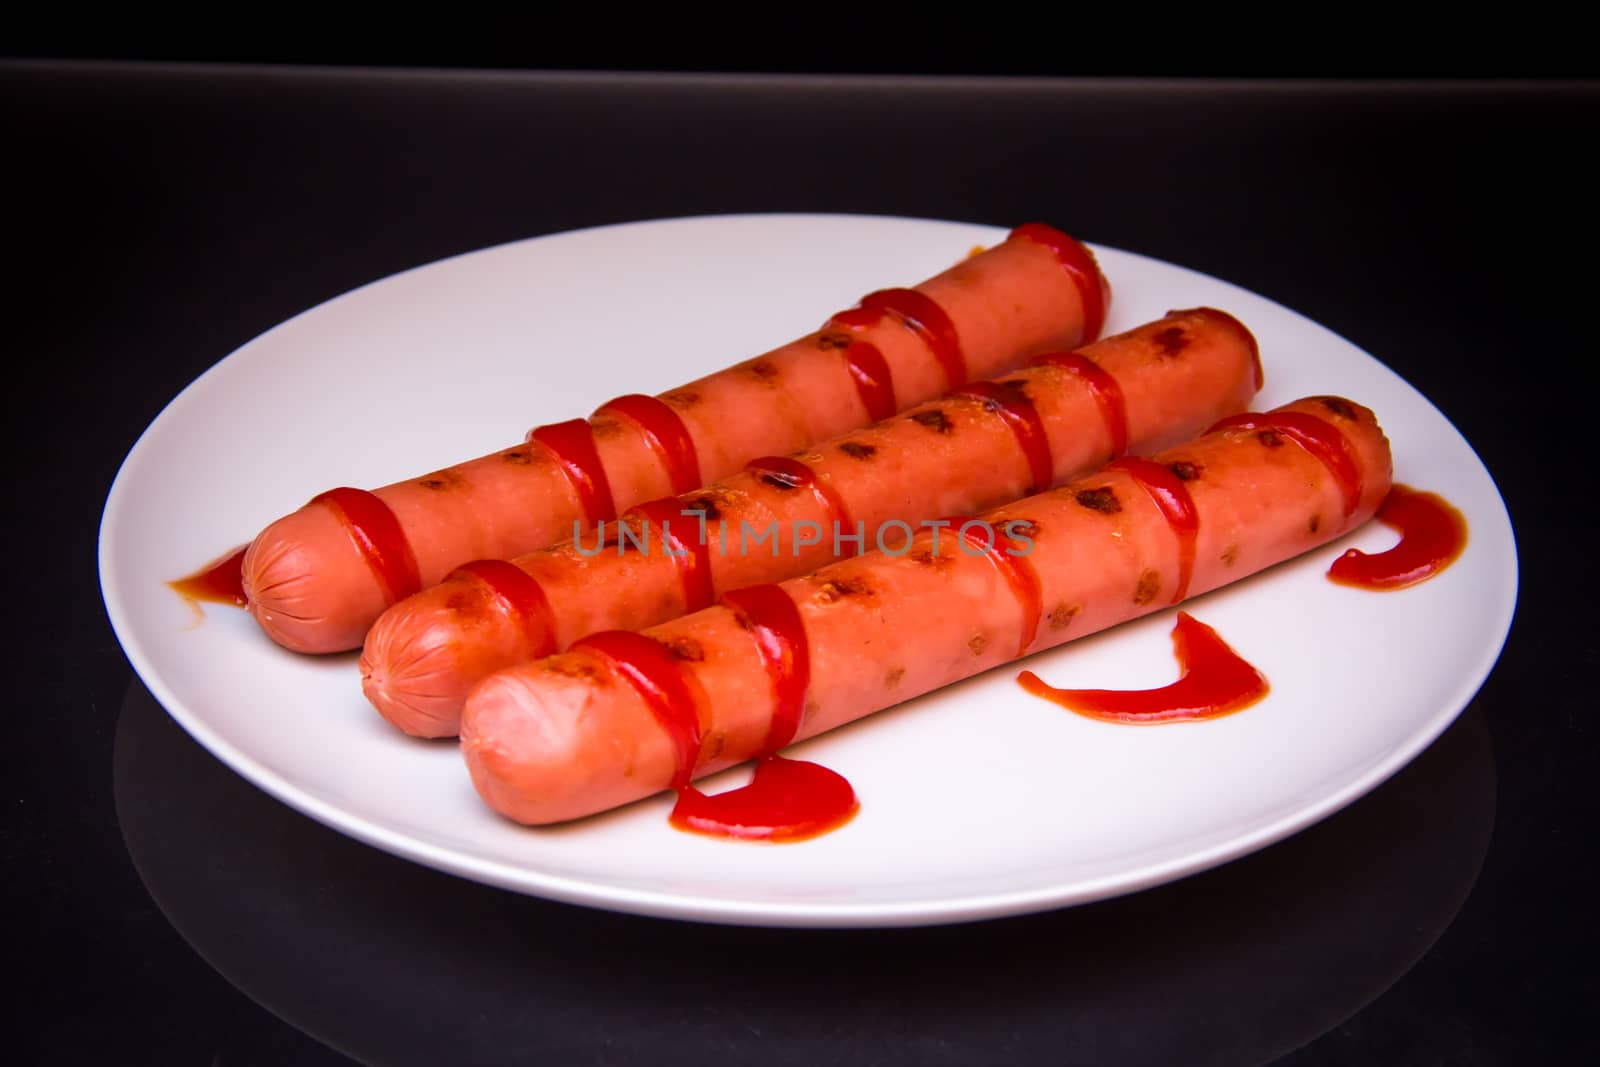 Sausages with tomato sauce on black by spafra